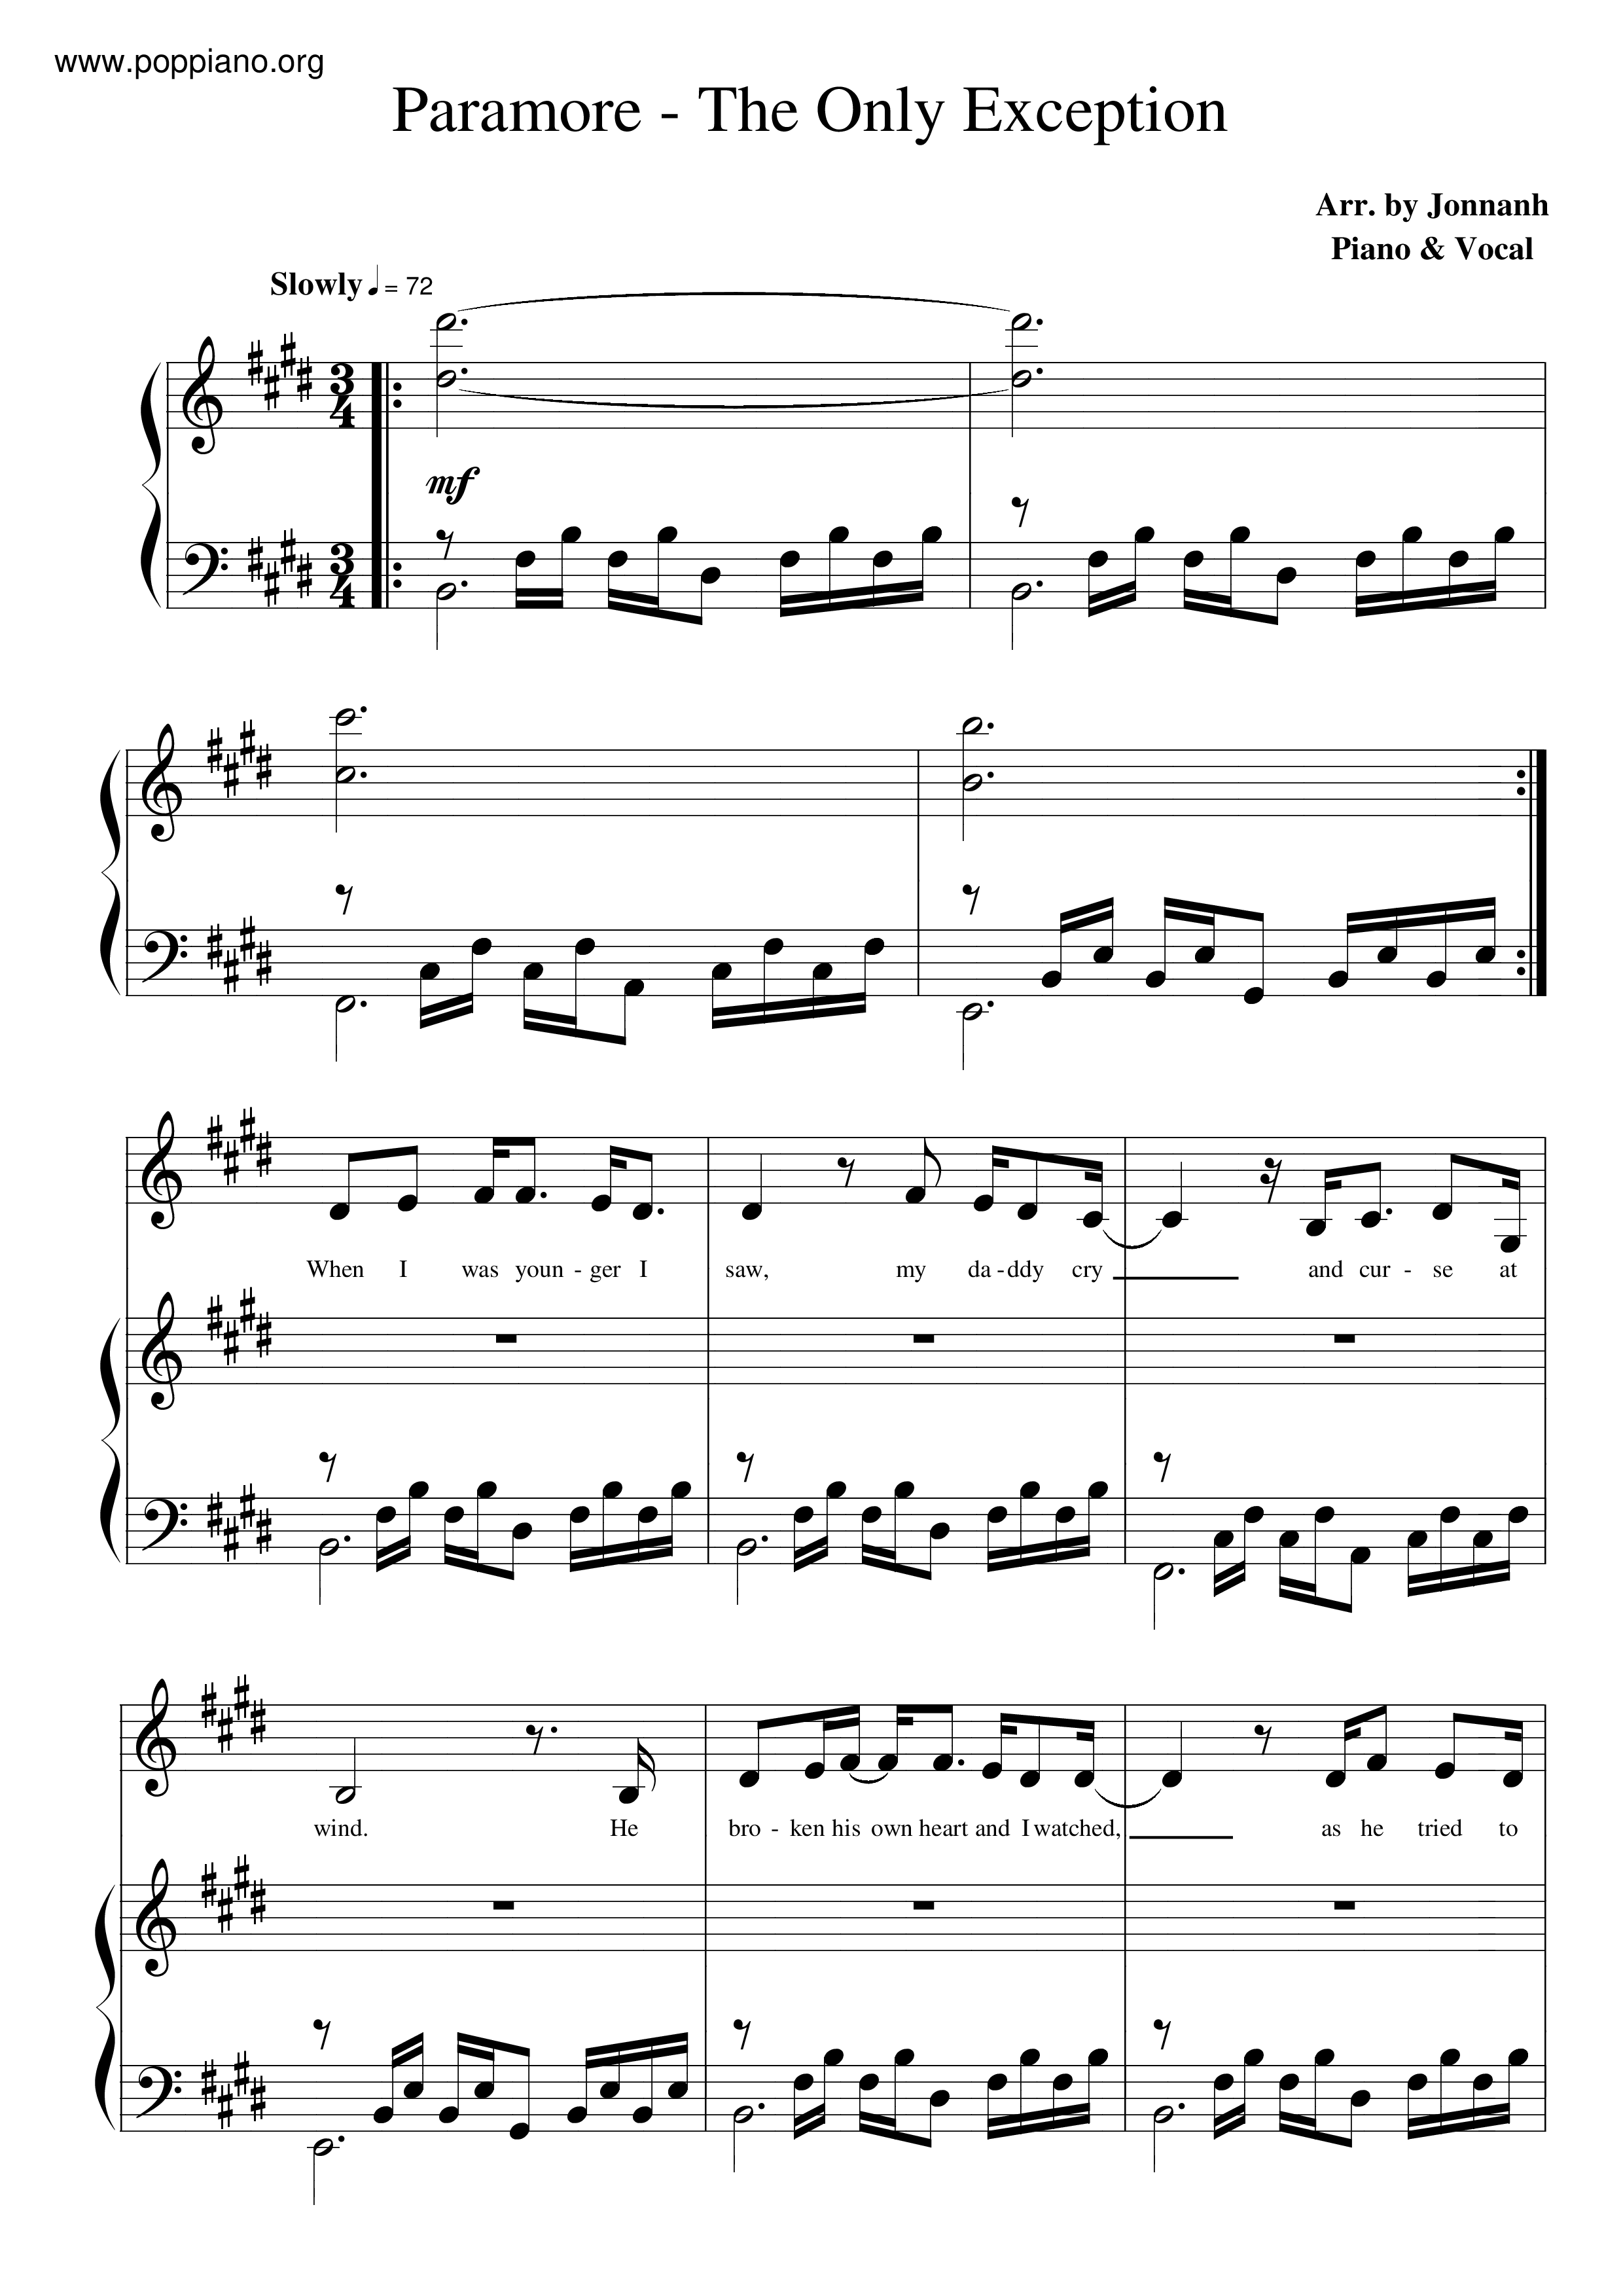 ☆ Paramore-The Only Exception Sheet Music pdf, - Free Score Download ☆